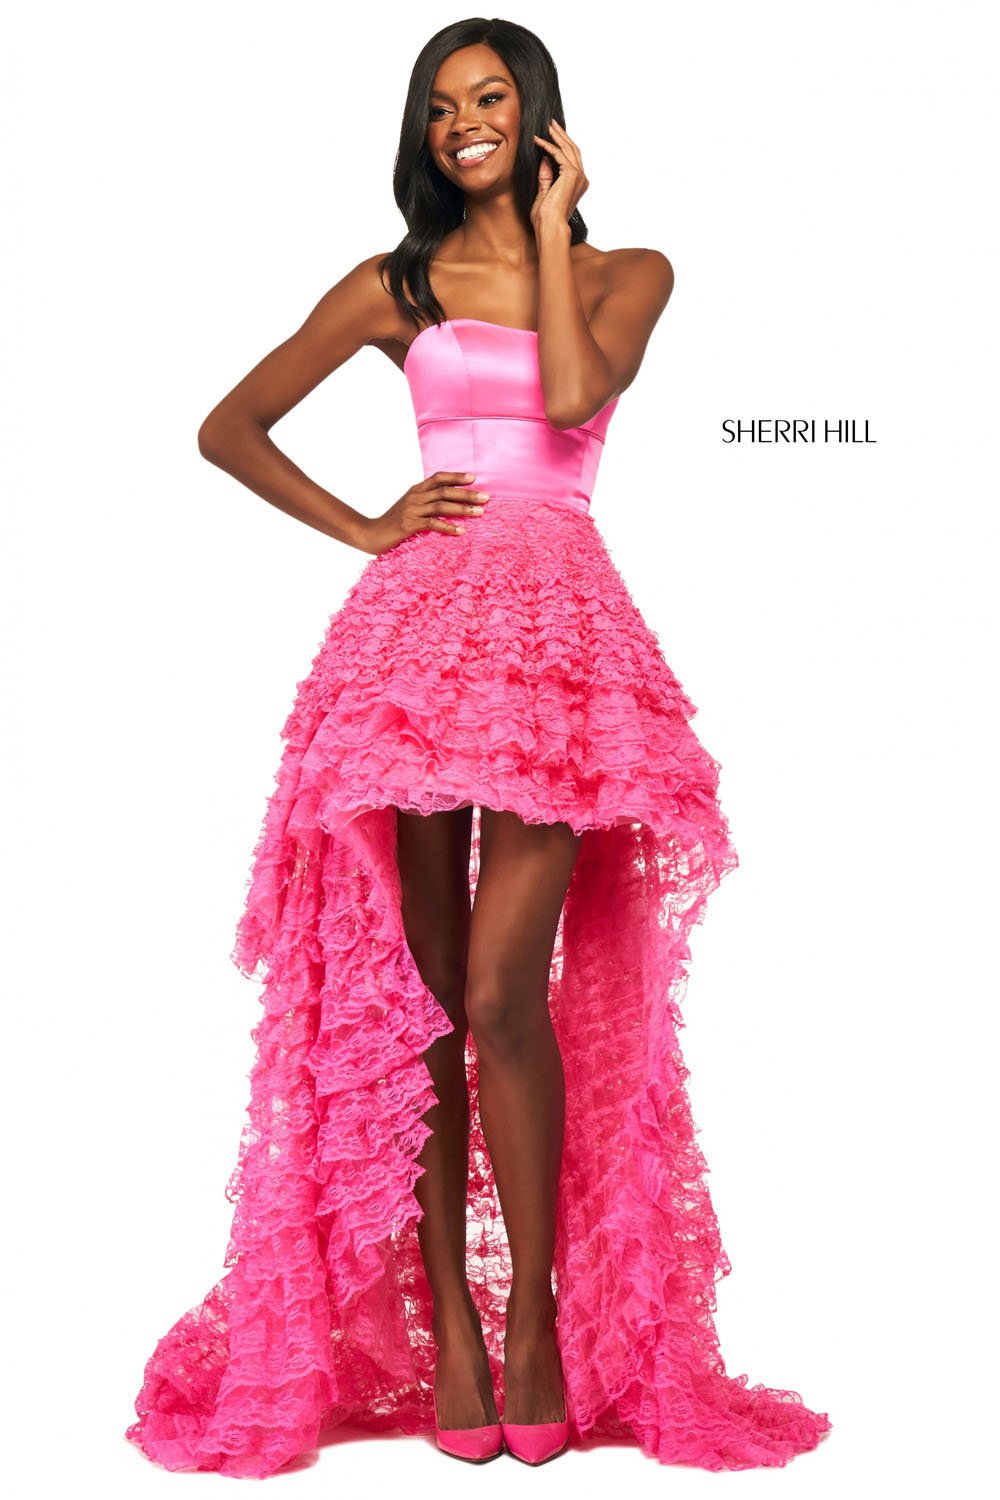 Sherri Hill 53720 dress images in these colors: Black, Coral, Blush, Candy Pink, Ivory, Red.